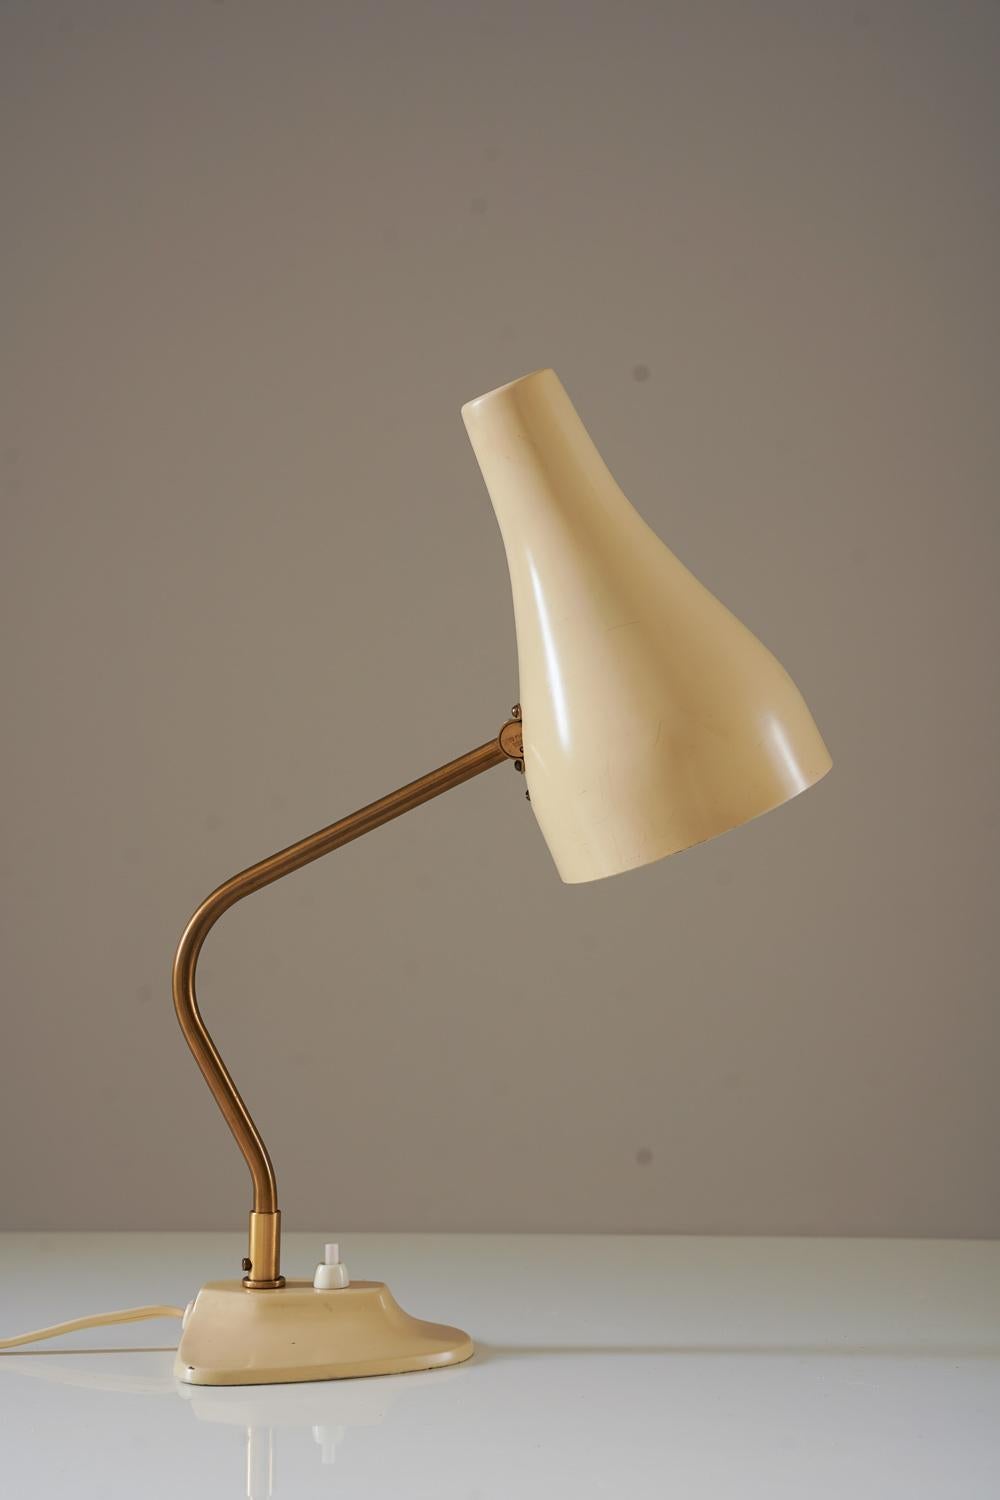 Rare desk lamp by ASEA, Sweden, model E-1267. The base and shade have a beautiful original cream-white color, while the stem is made of polished brass.

Condition: Very good original condition, with light signs of age and use